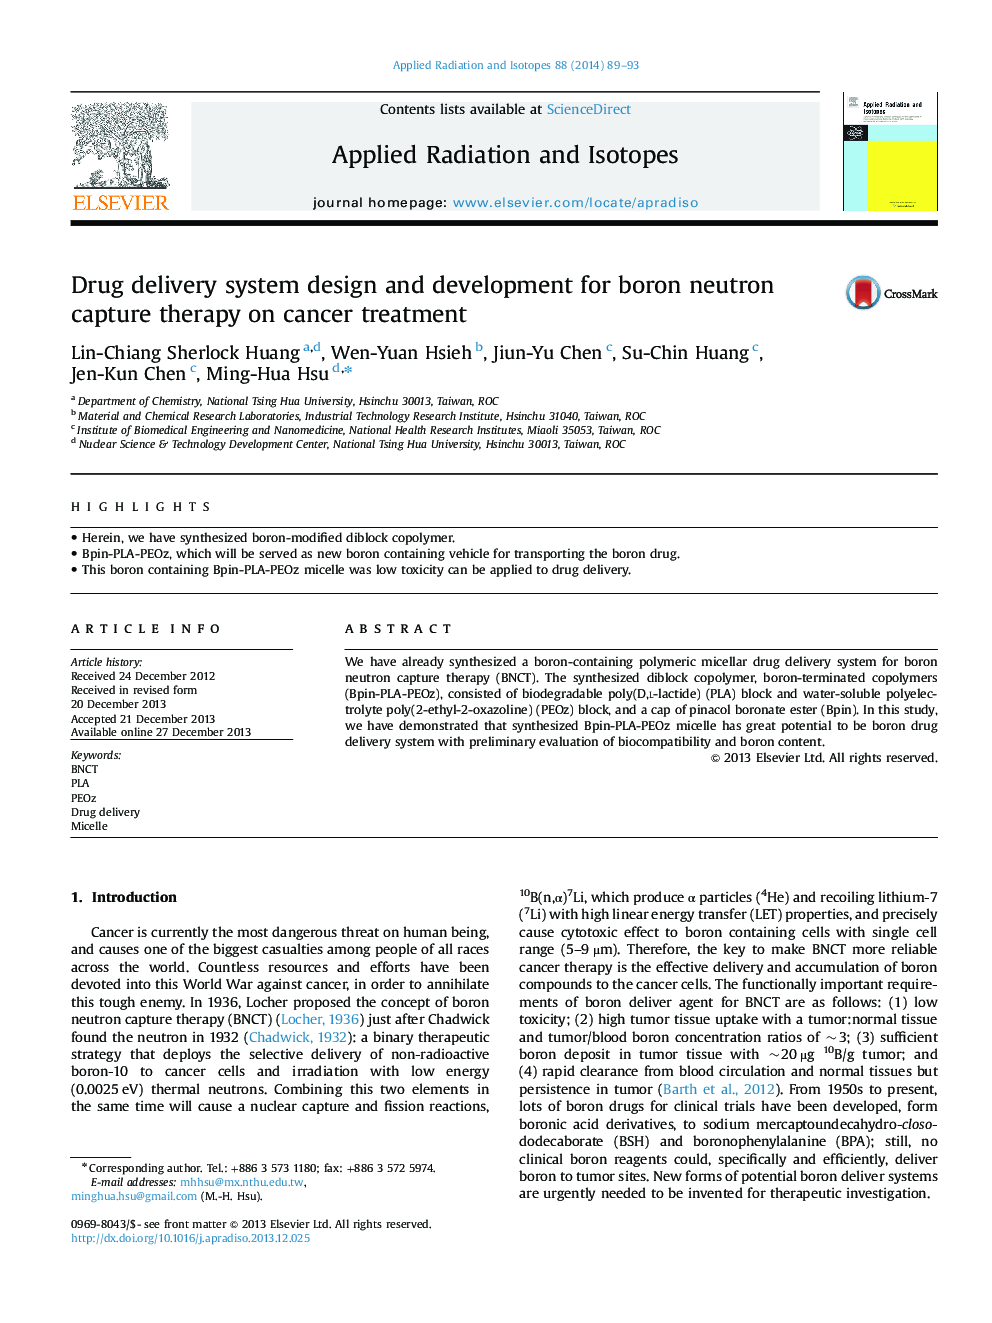 Drug delivery system design and development for boron neutron capture therapy on cancer treatment